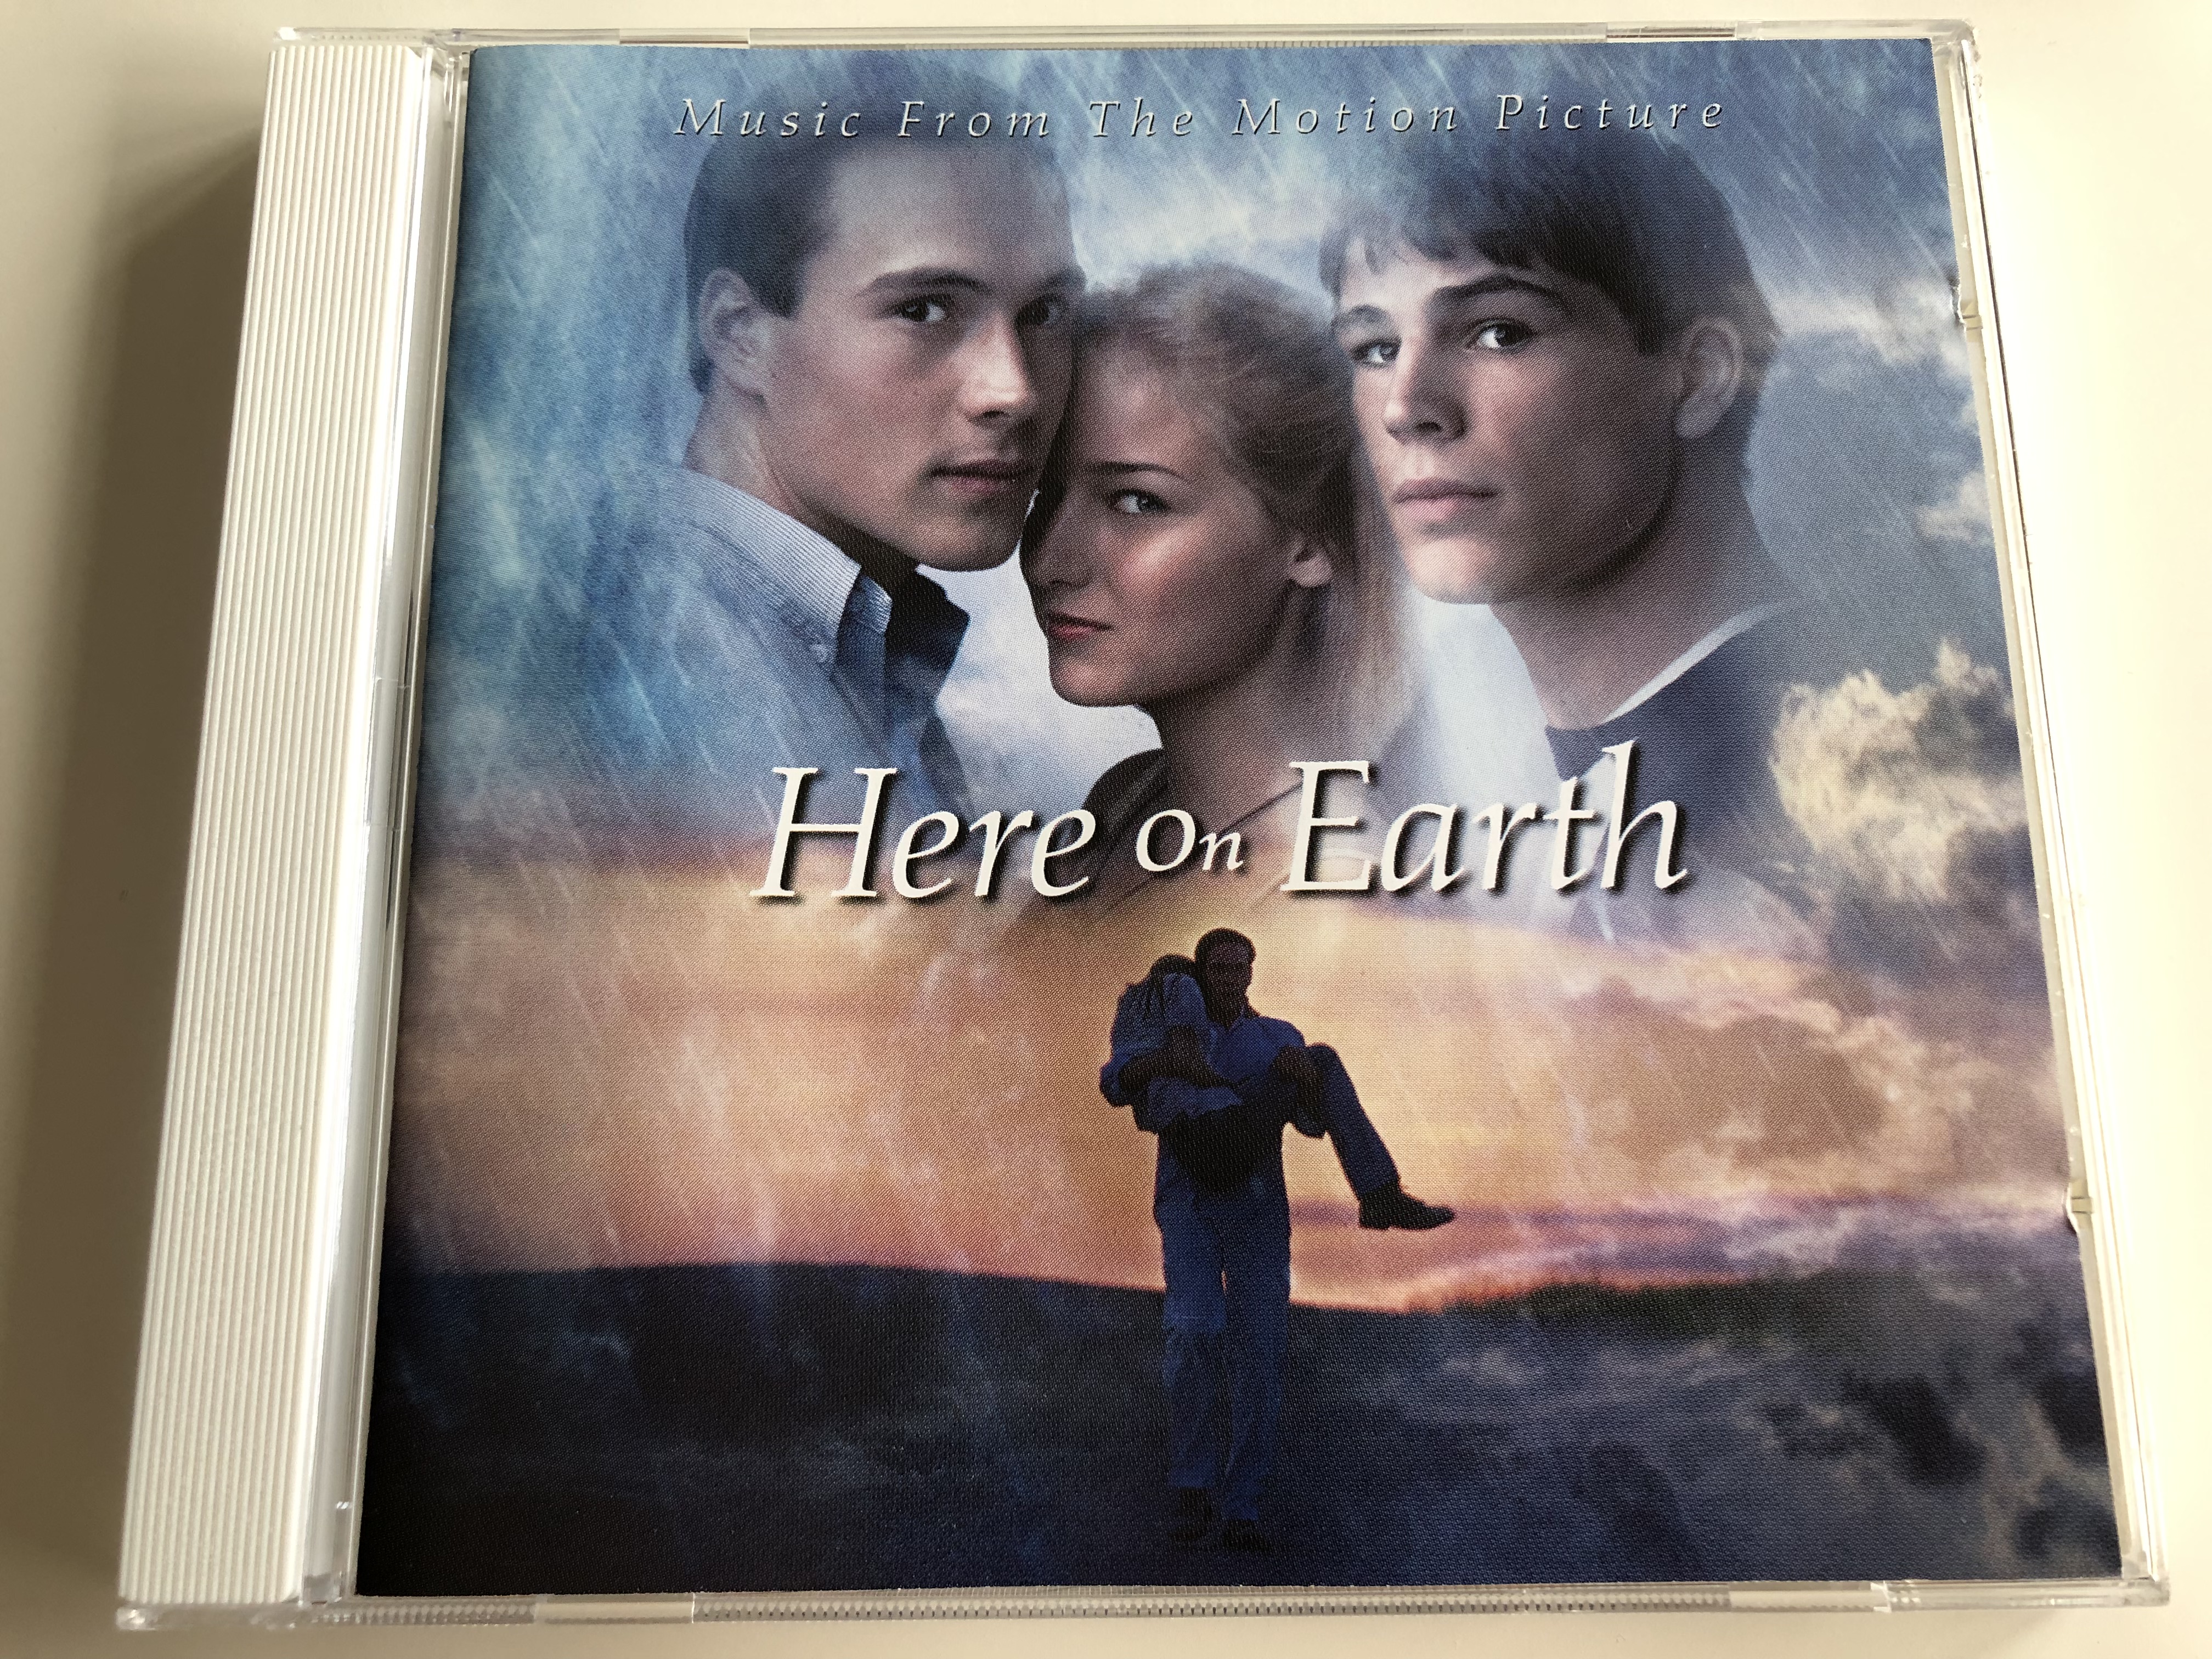 here-on-earth-ost-music-from-the-motion-picture-jessica-simpson-sixpence-none-the-richer-stereophonix-tori-amos-andrea-morricone-audio-cd-2000-sony-music-soundtrax-1-.jpg